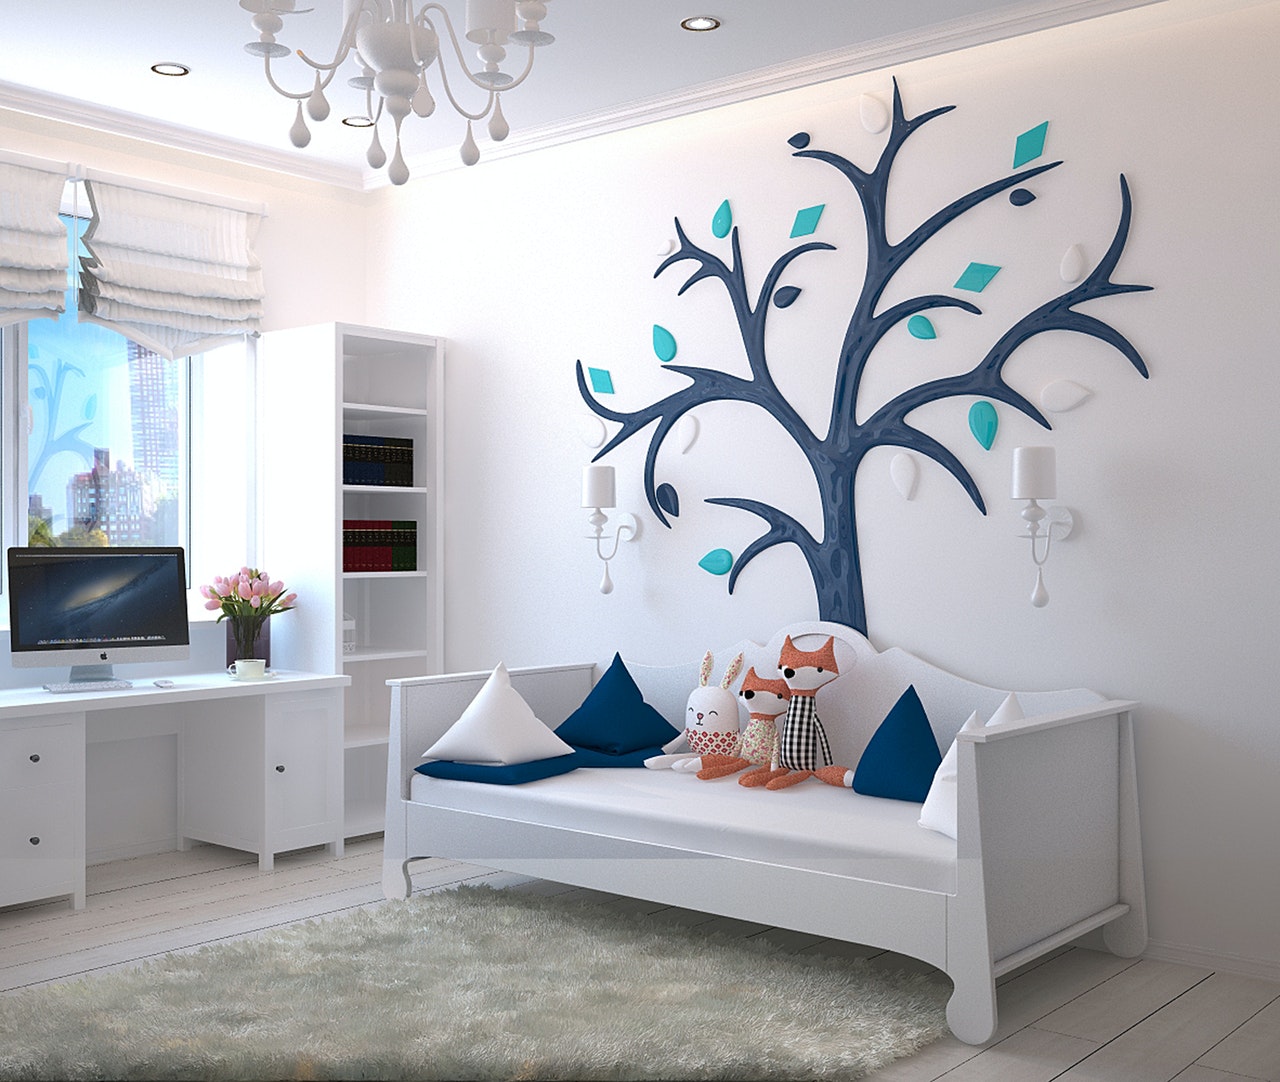 Forest theme in a child’s room – inspirations